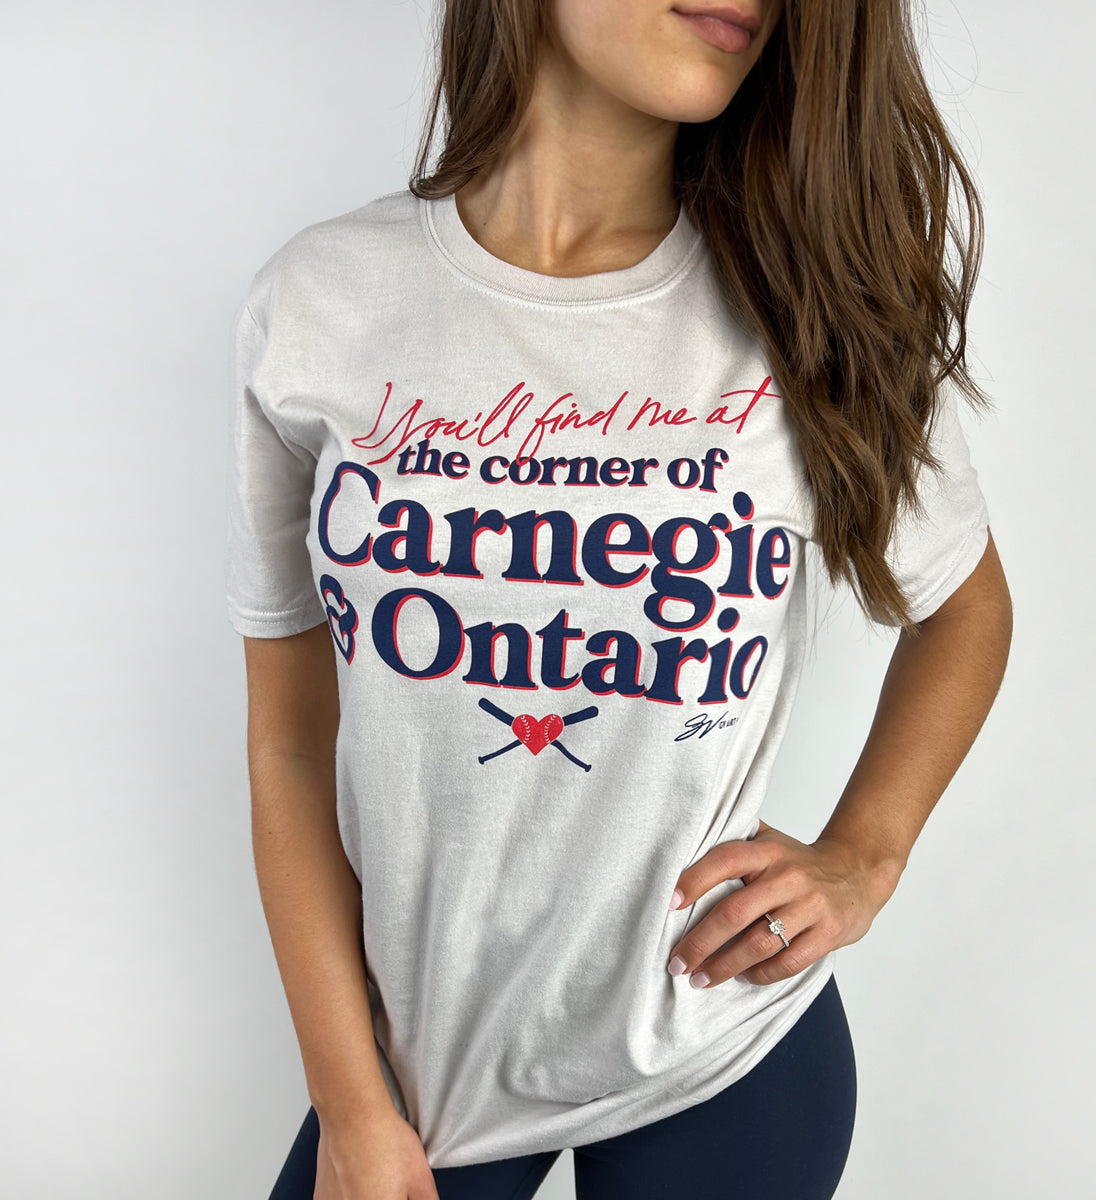 Voted Best! Shop our famous Collection of One of a Kind T-shirts !